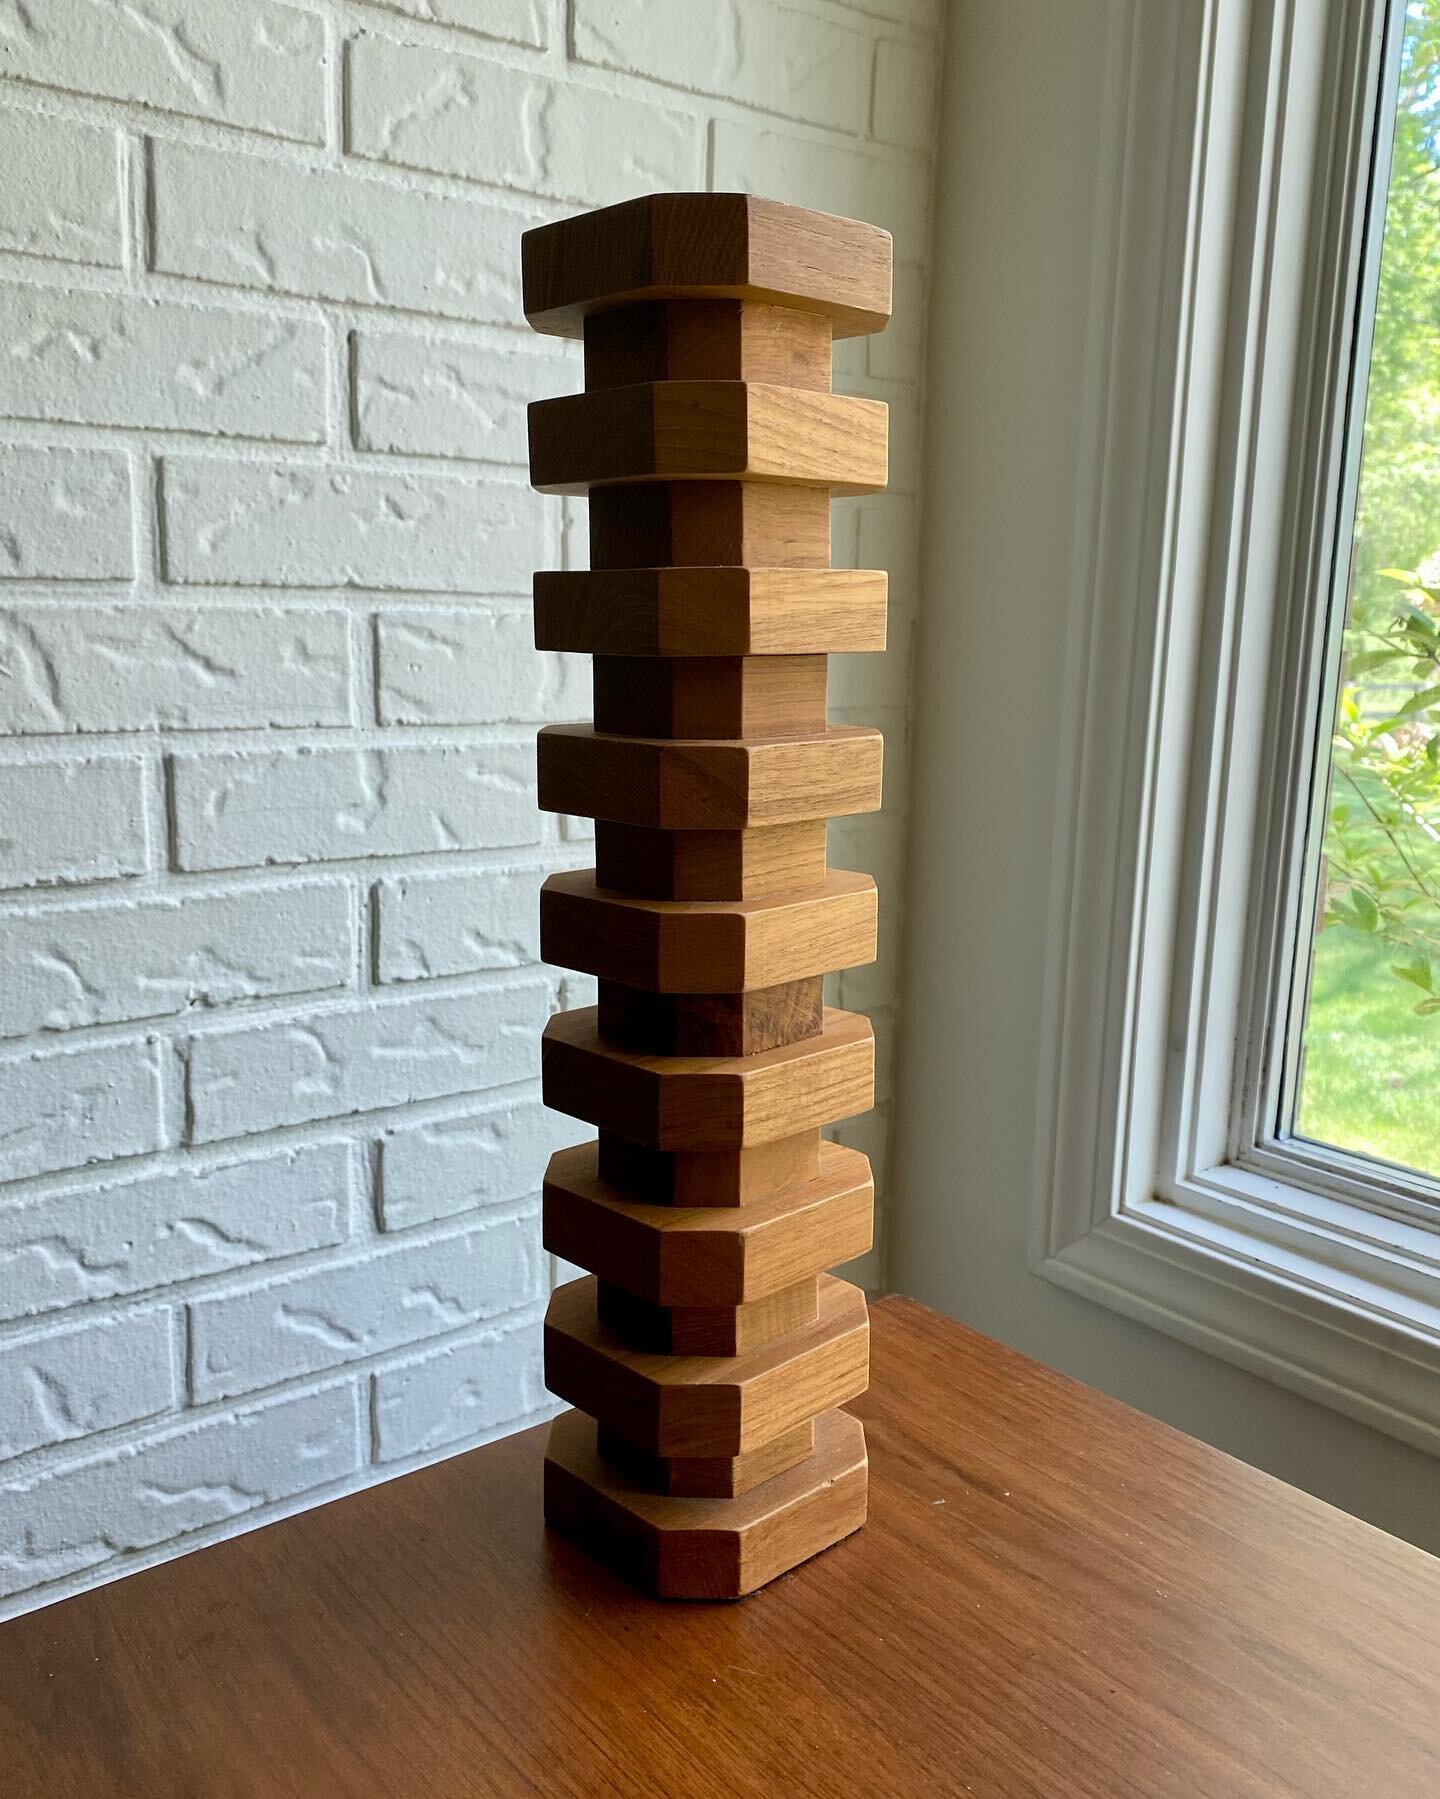 ✨FOR SALE:✨
Cool sculptural tall wood candlestick holder. I love this for styling! This would be great on a mantle or console table.

$20 + shipping

Comment &ldquo;sold&rdquo; to claim and DM me to arrange purchase + shipping/pickup.